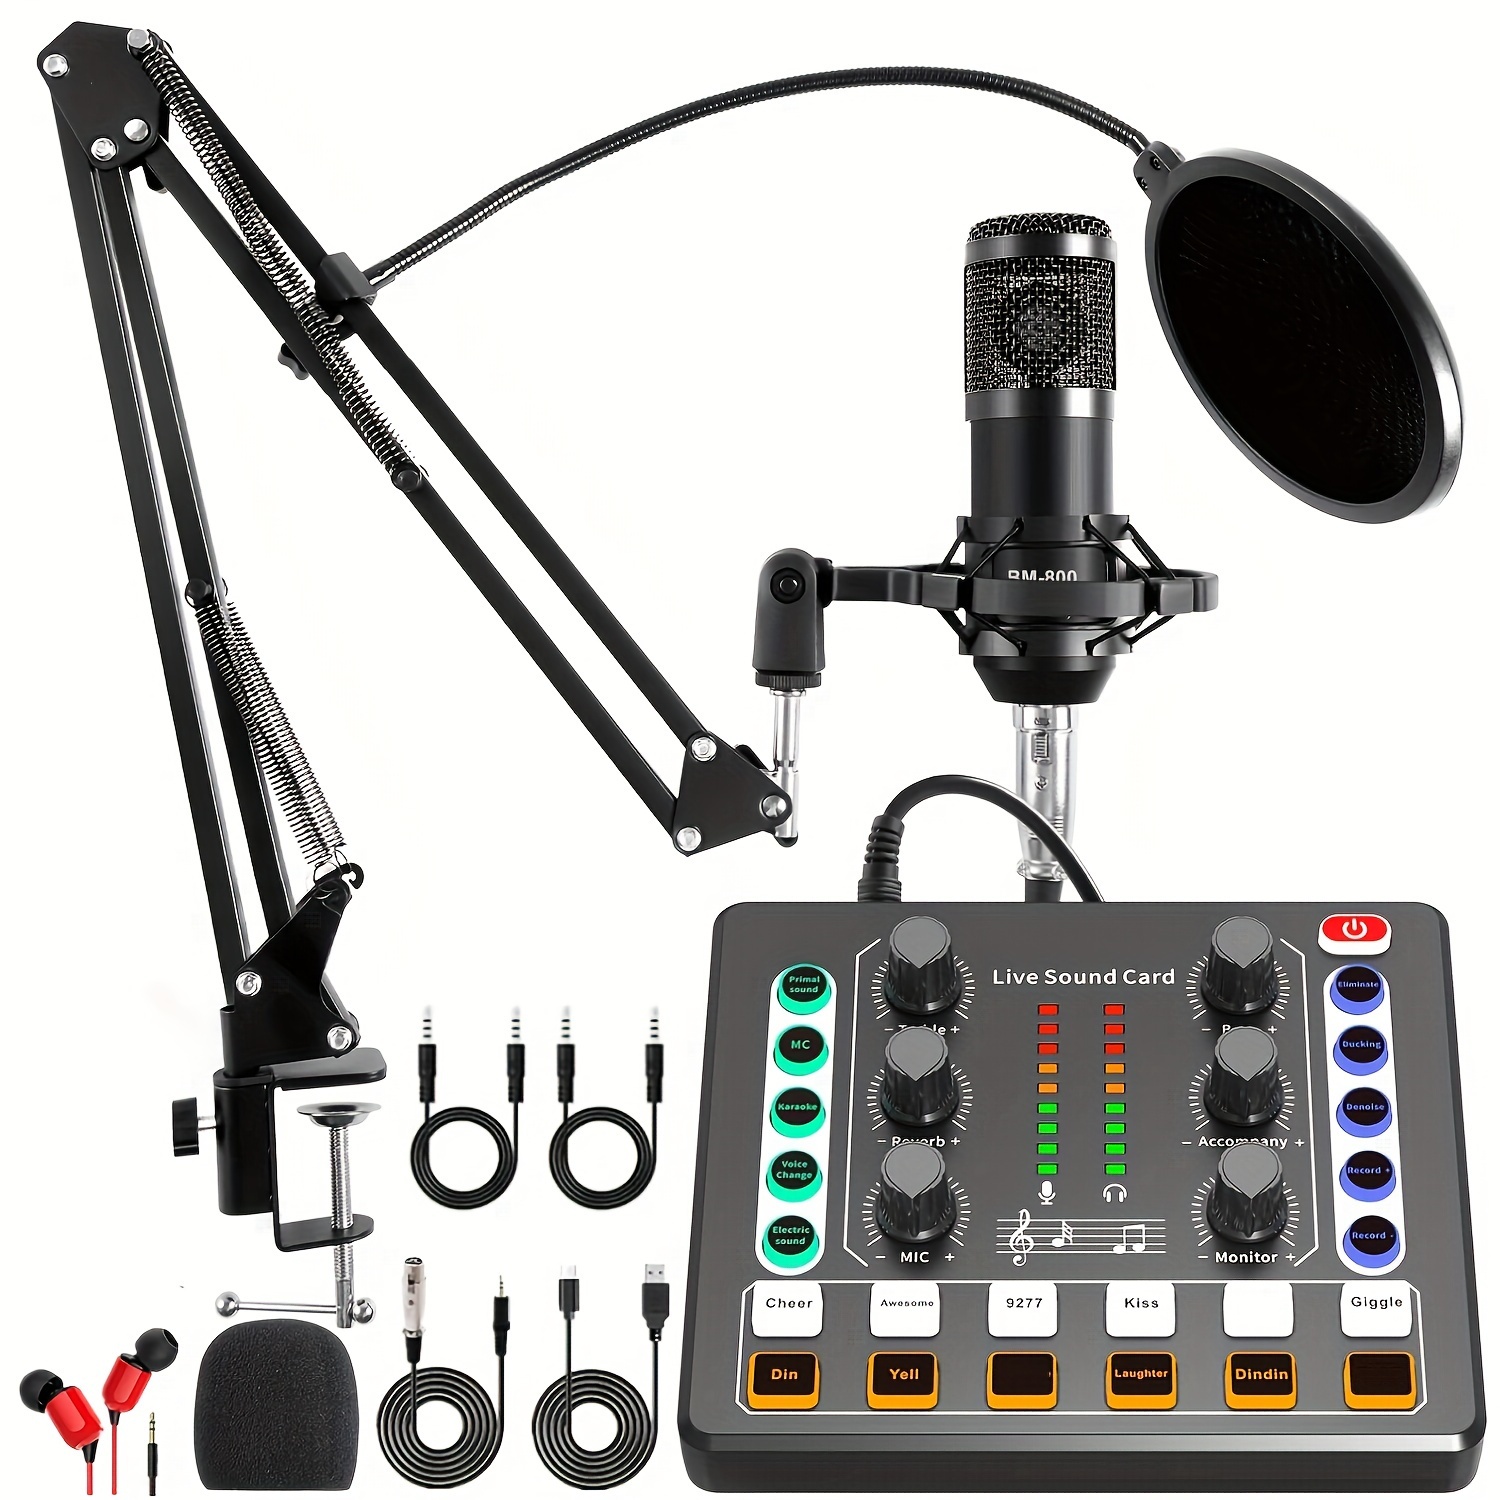 

Podcast Equipment Bundle, M8 Audio Interface With All-in-one Dj Mixer And Studio Broadcast Microphone, Perfect For Recording, Live Streaming, Gaming, Compatible With Pc, Smartphone